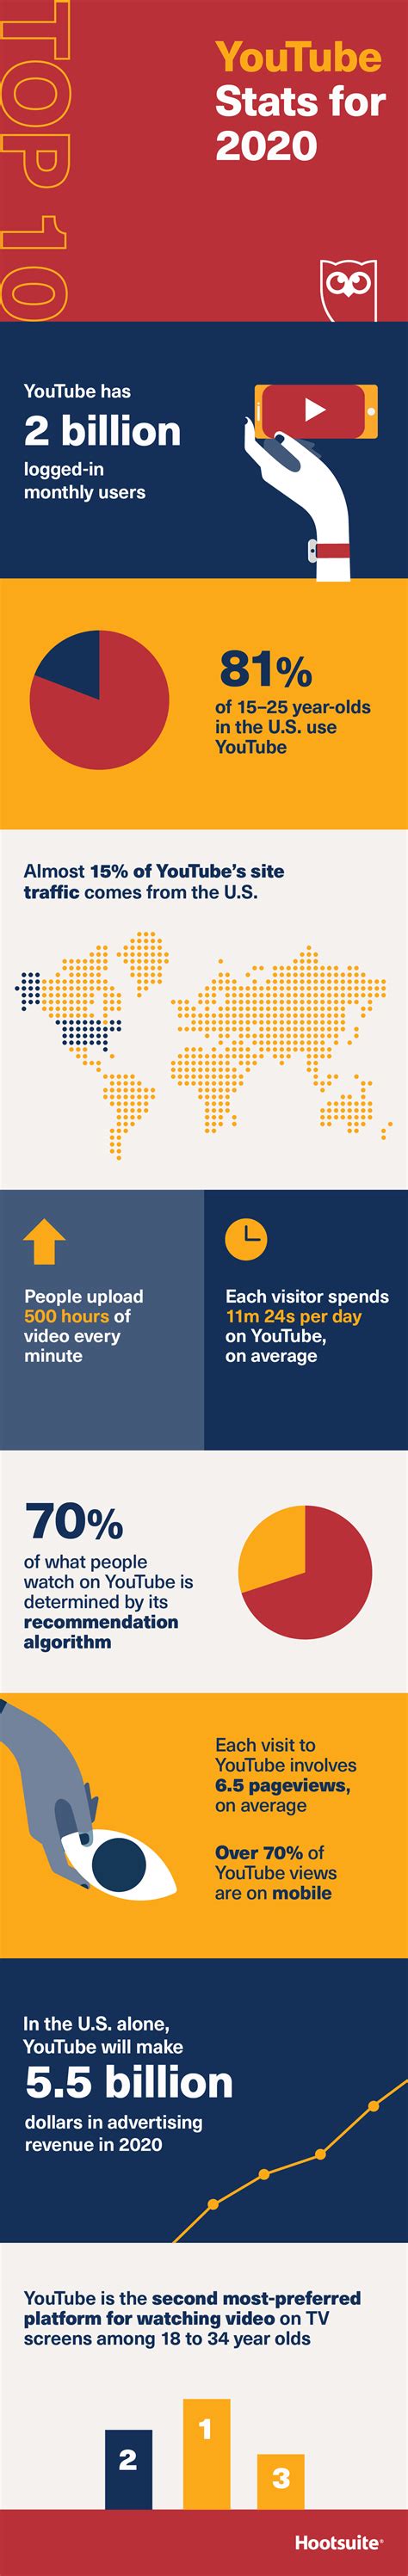 Youtubes Top Stats For 2020 Tell Whos Watching What When Infographic